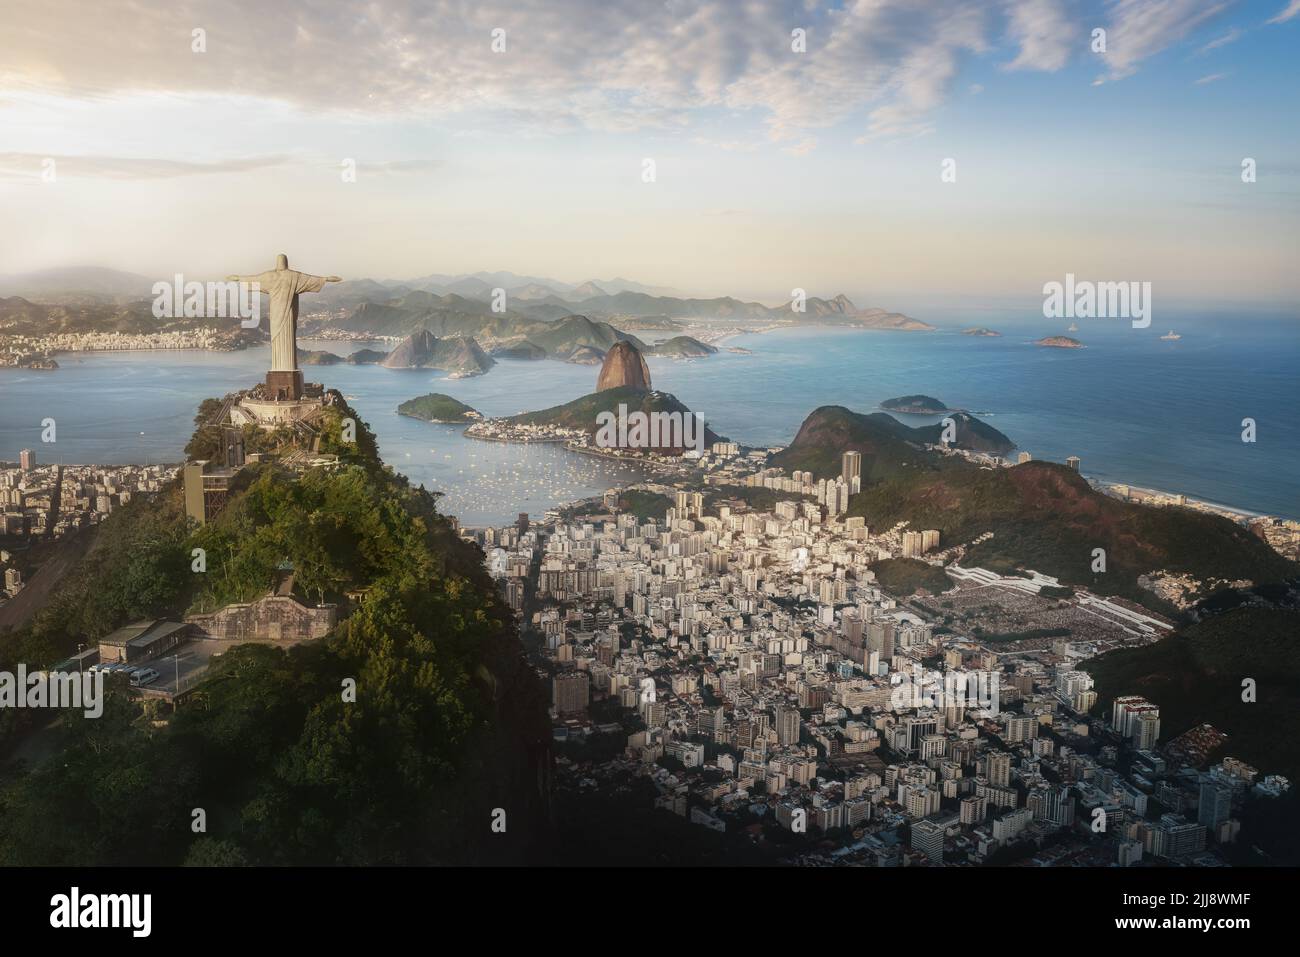 Aerial view of Rio with Corcovado Mountain, Christ the Redeemer Statue, Sugarloaf Mountain and Guanabara Bay at sunset - Rio de Janeiro, Brazil Stock Photo